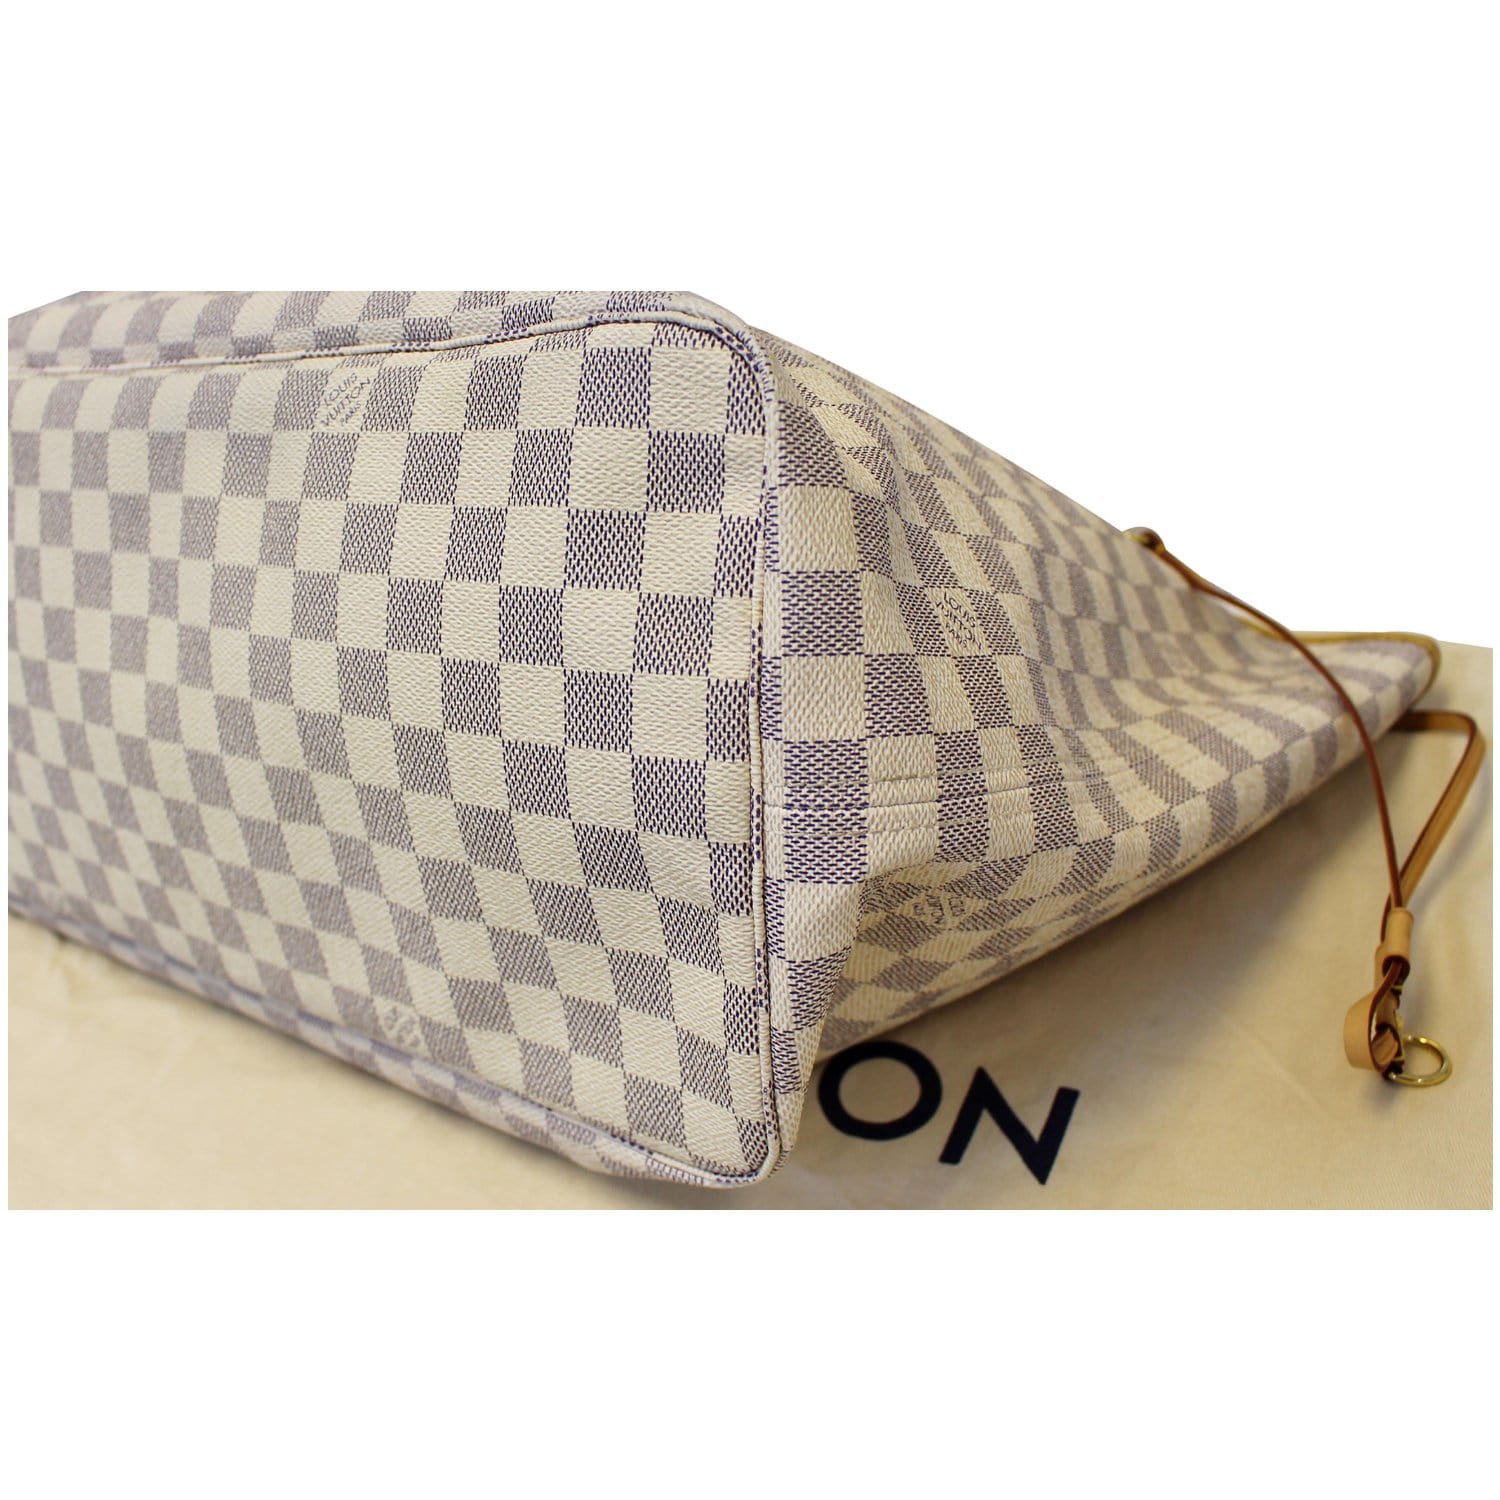 ViaAnabel - 🤍Louis Vuitton Damier Azur Totally GM Bag ▪️This stylish tote  is finely crafted of Louis Vuitton signature damier canvas in azure blue in  the largest size. ▪️The bag feature vachetta